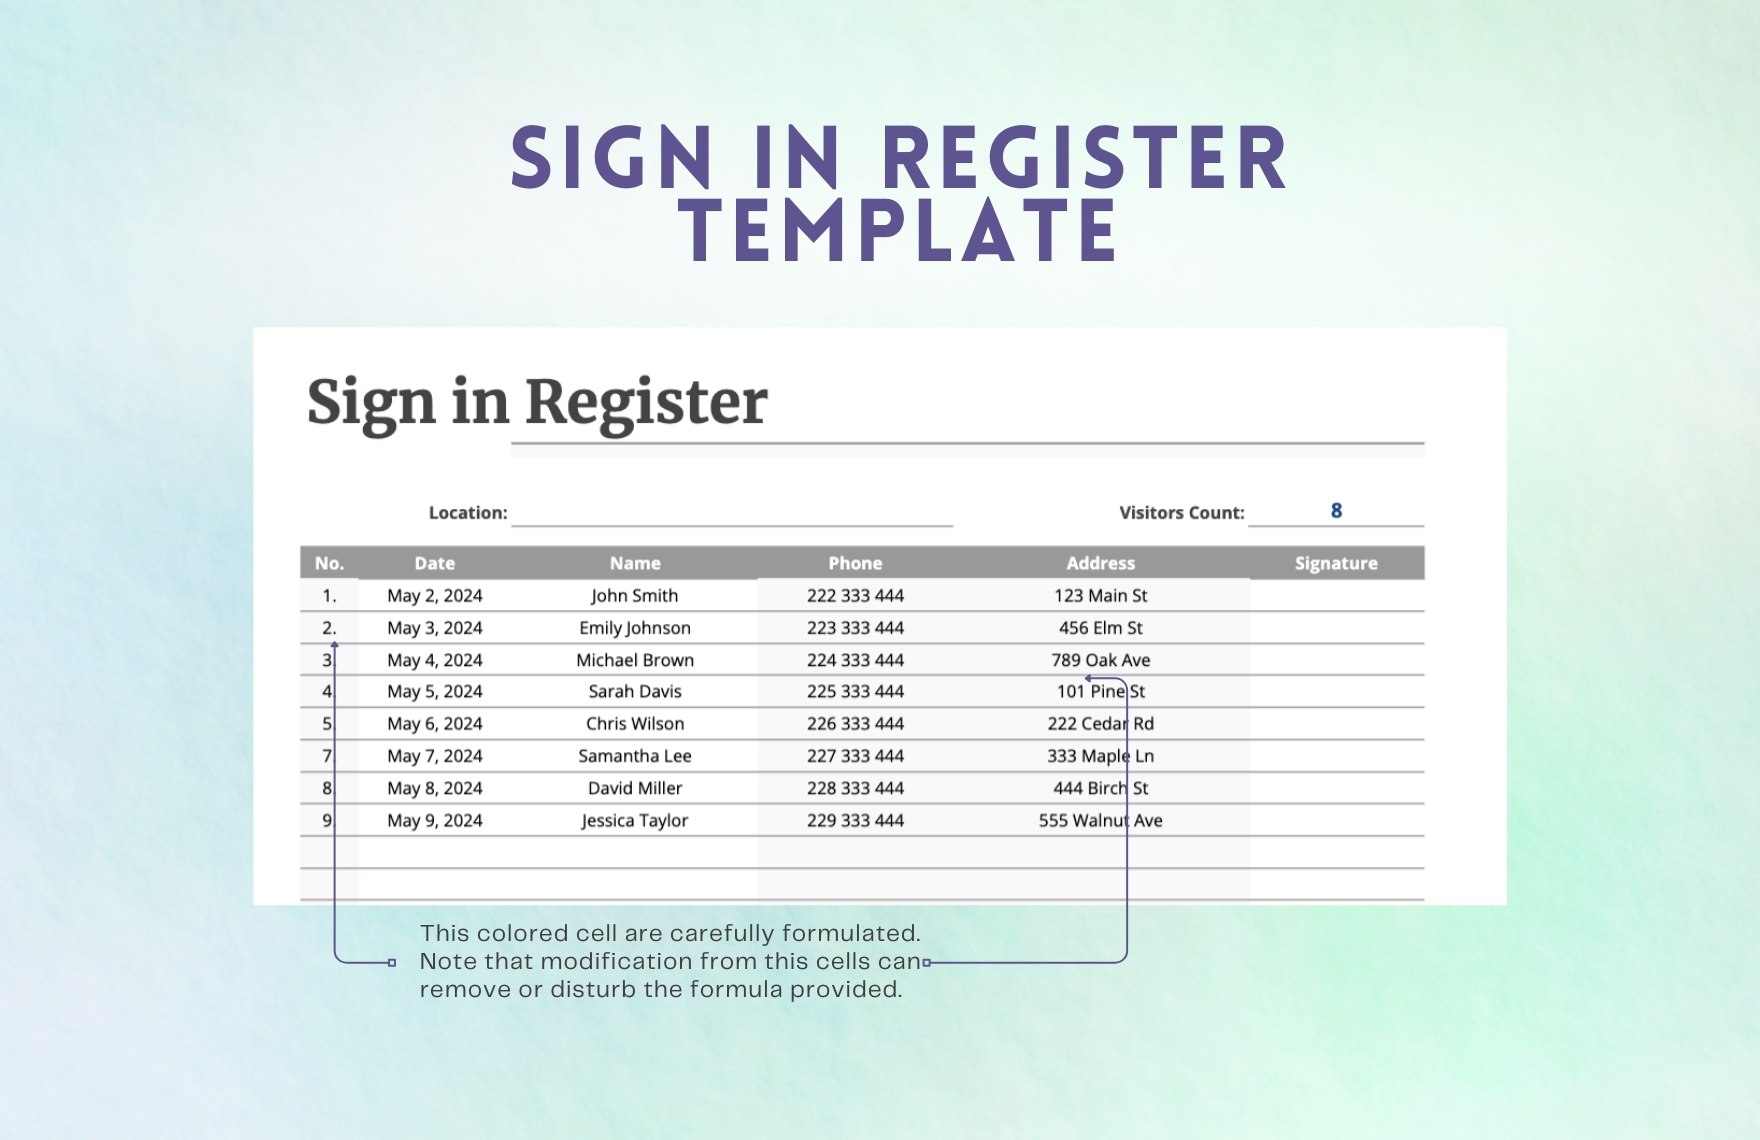 Sign in Register Template